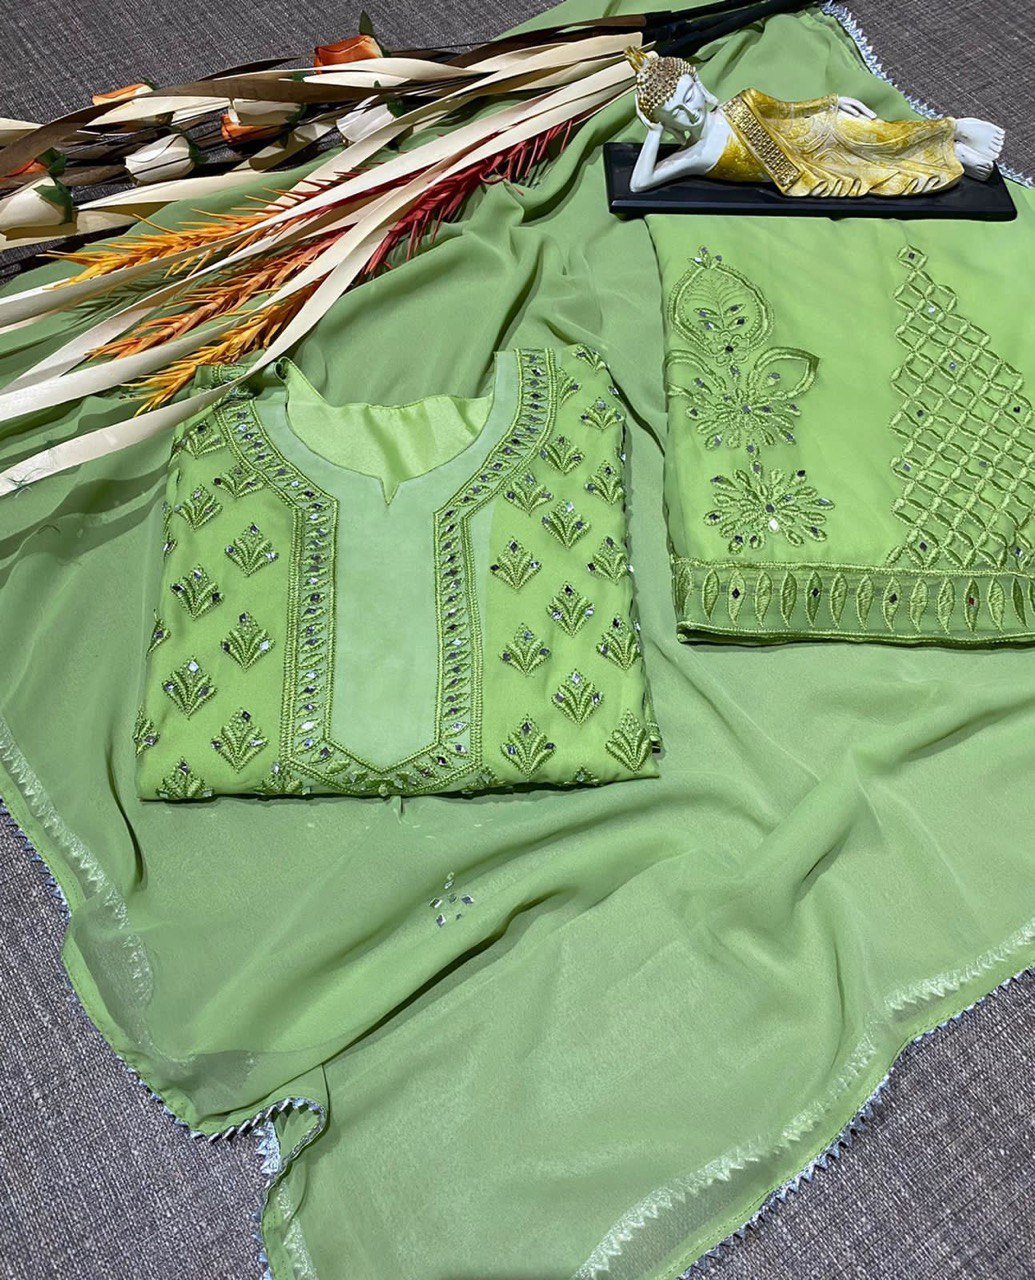 Cotton Thread Embroidery Suit With Real Mirror